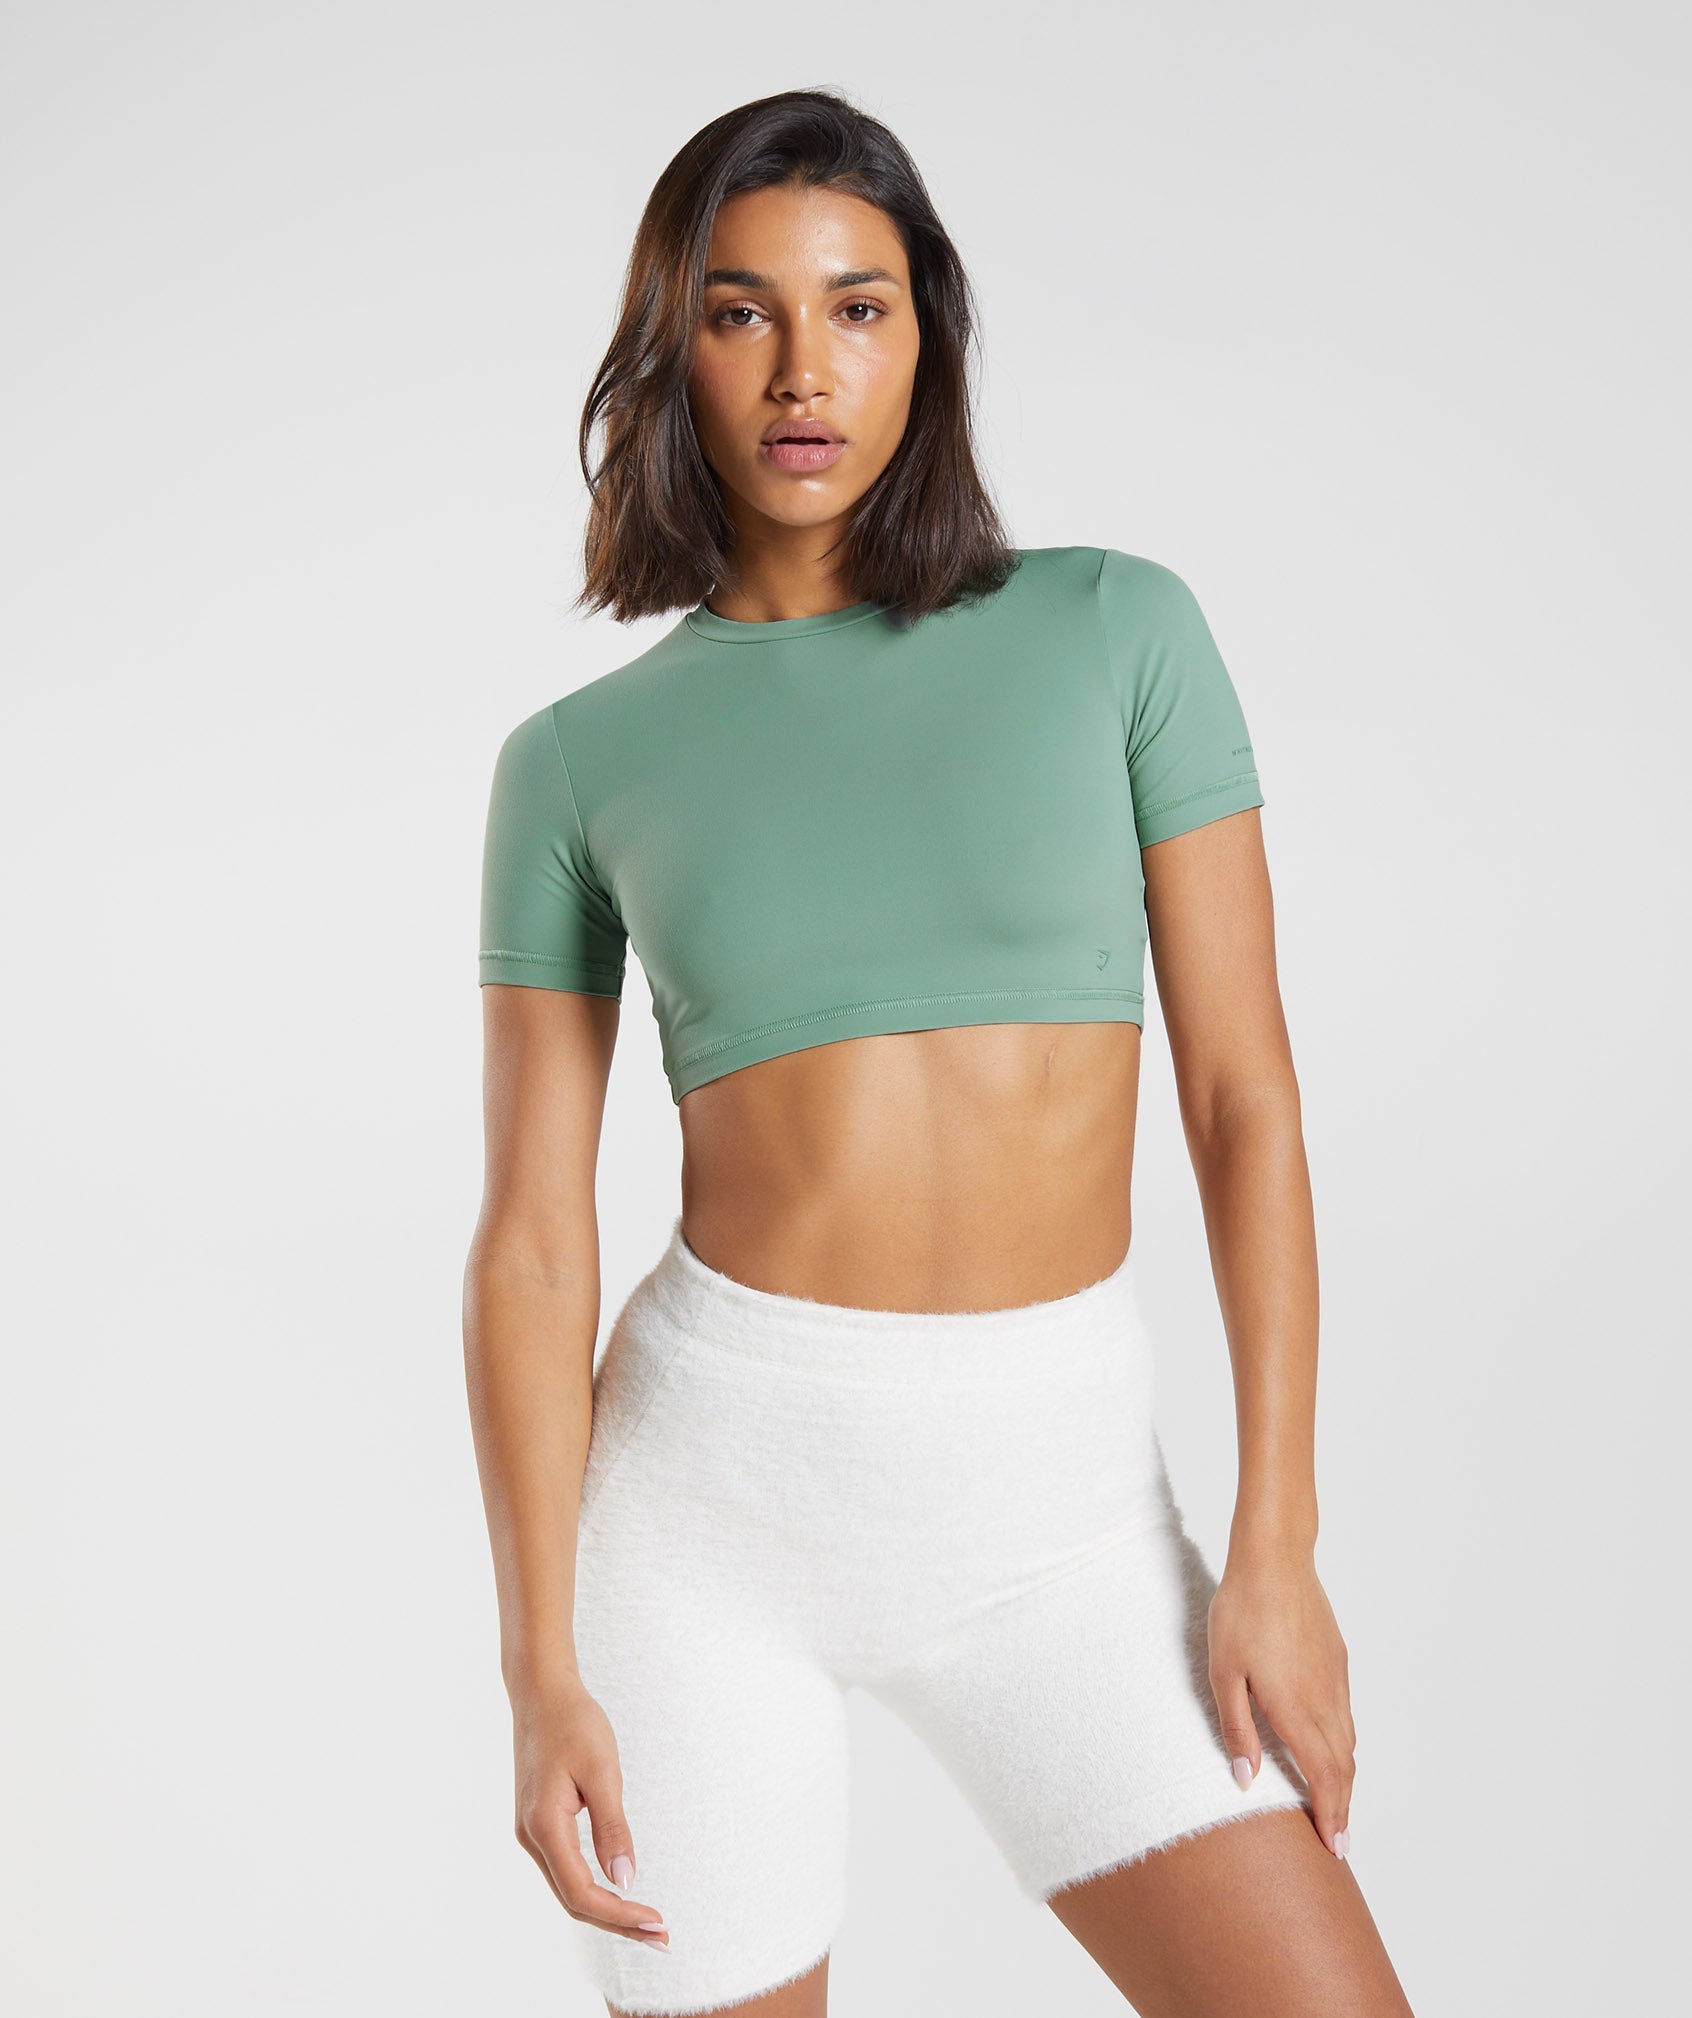 Whitney Short Sleeve Crop Top in {{variantColor} is out of stock